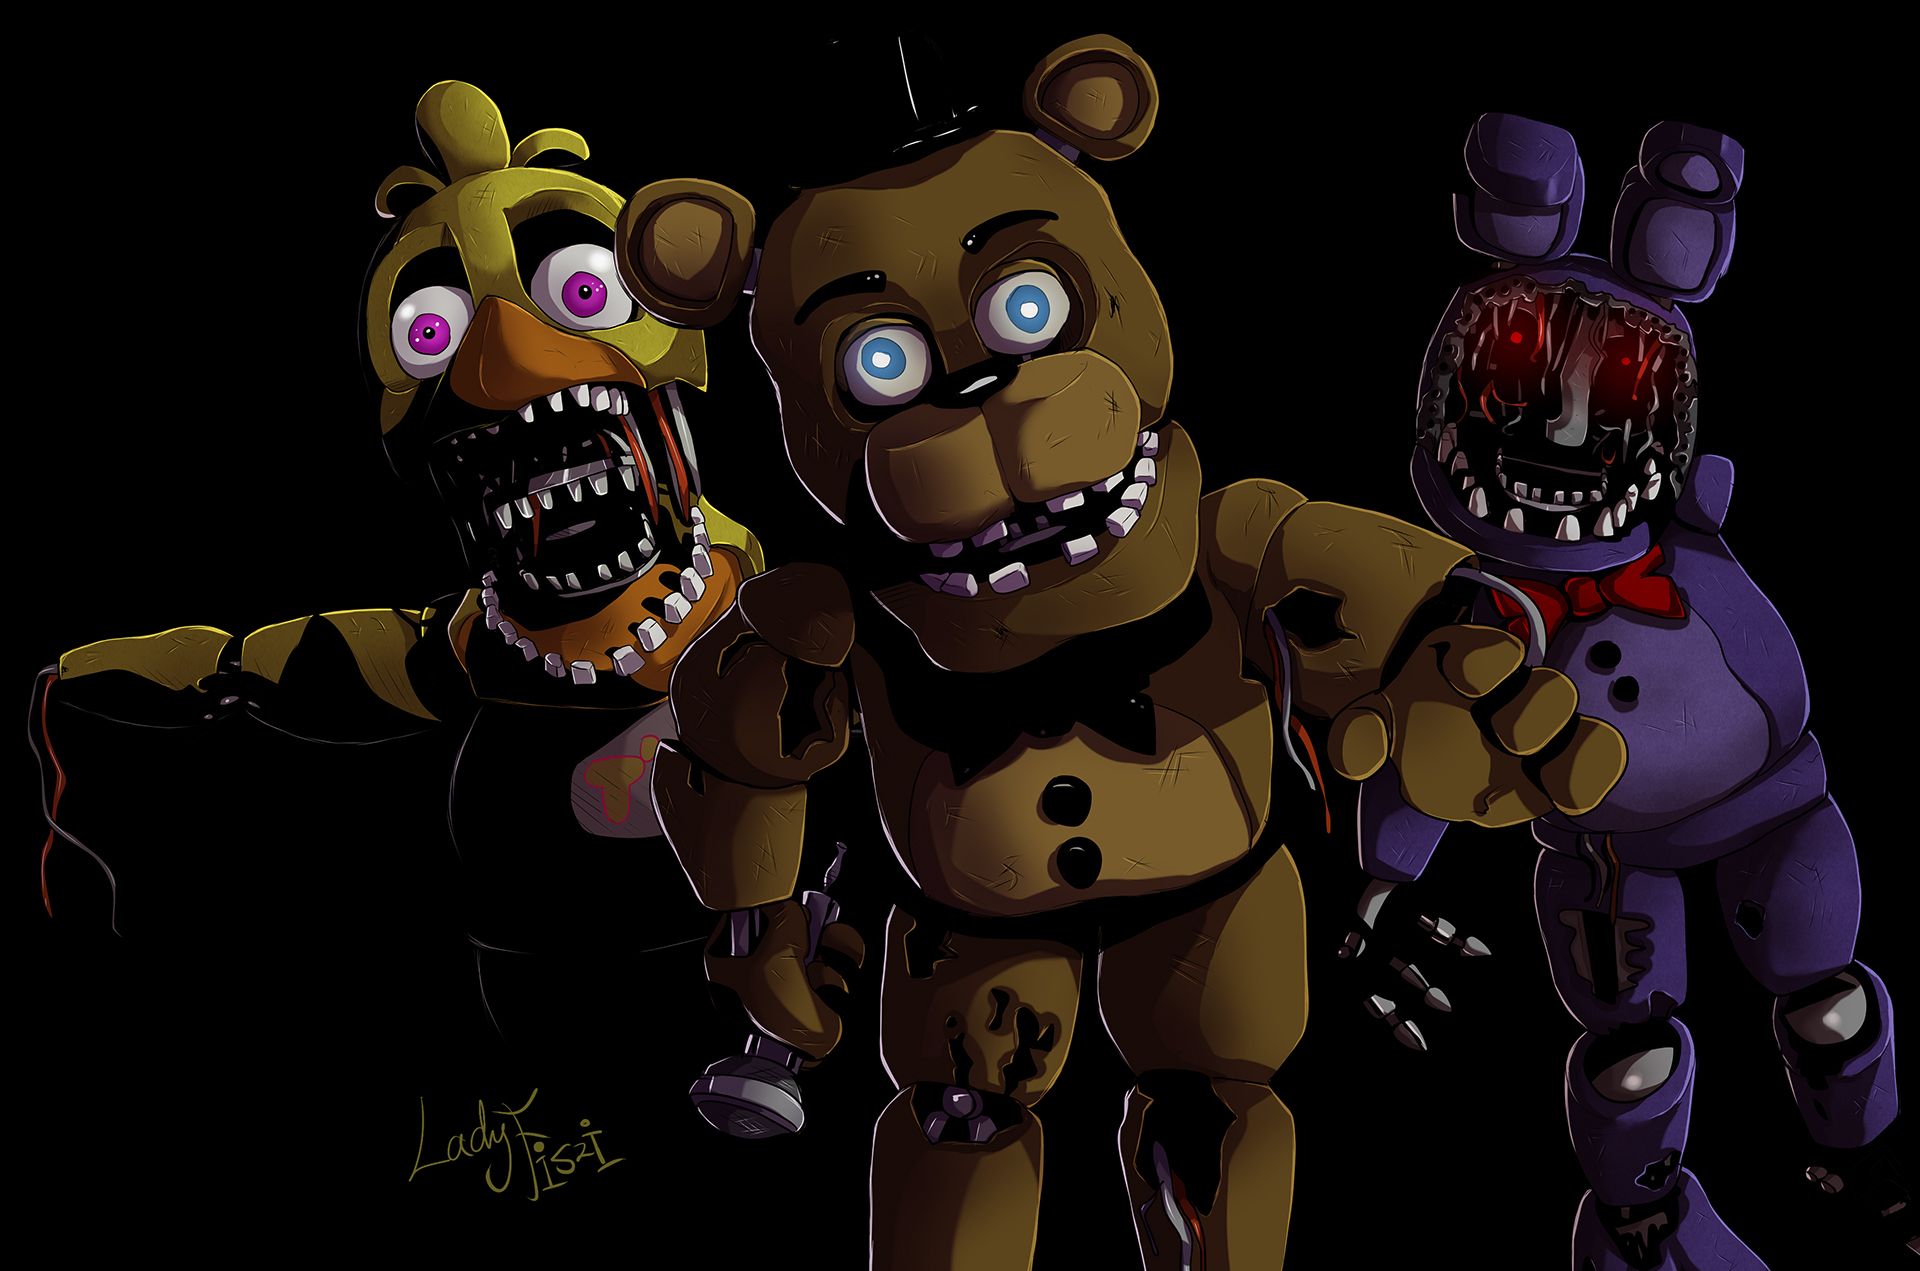 Withered Chica (Five Nights at Freddys), Withered Freddy (Five Nights at Freddys), Withered Bonnie (Five Nights at Freddys) wallpaper. Mocah.org HD Wallpaper